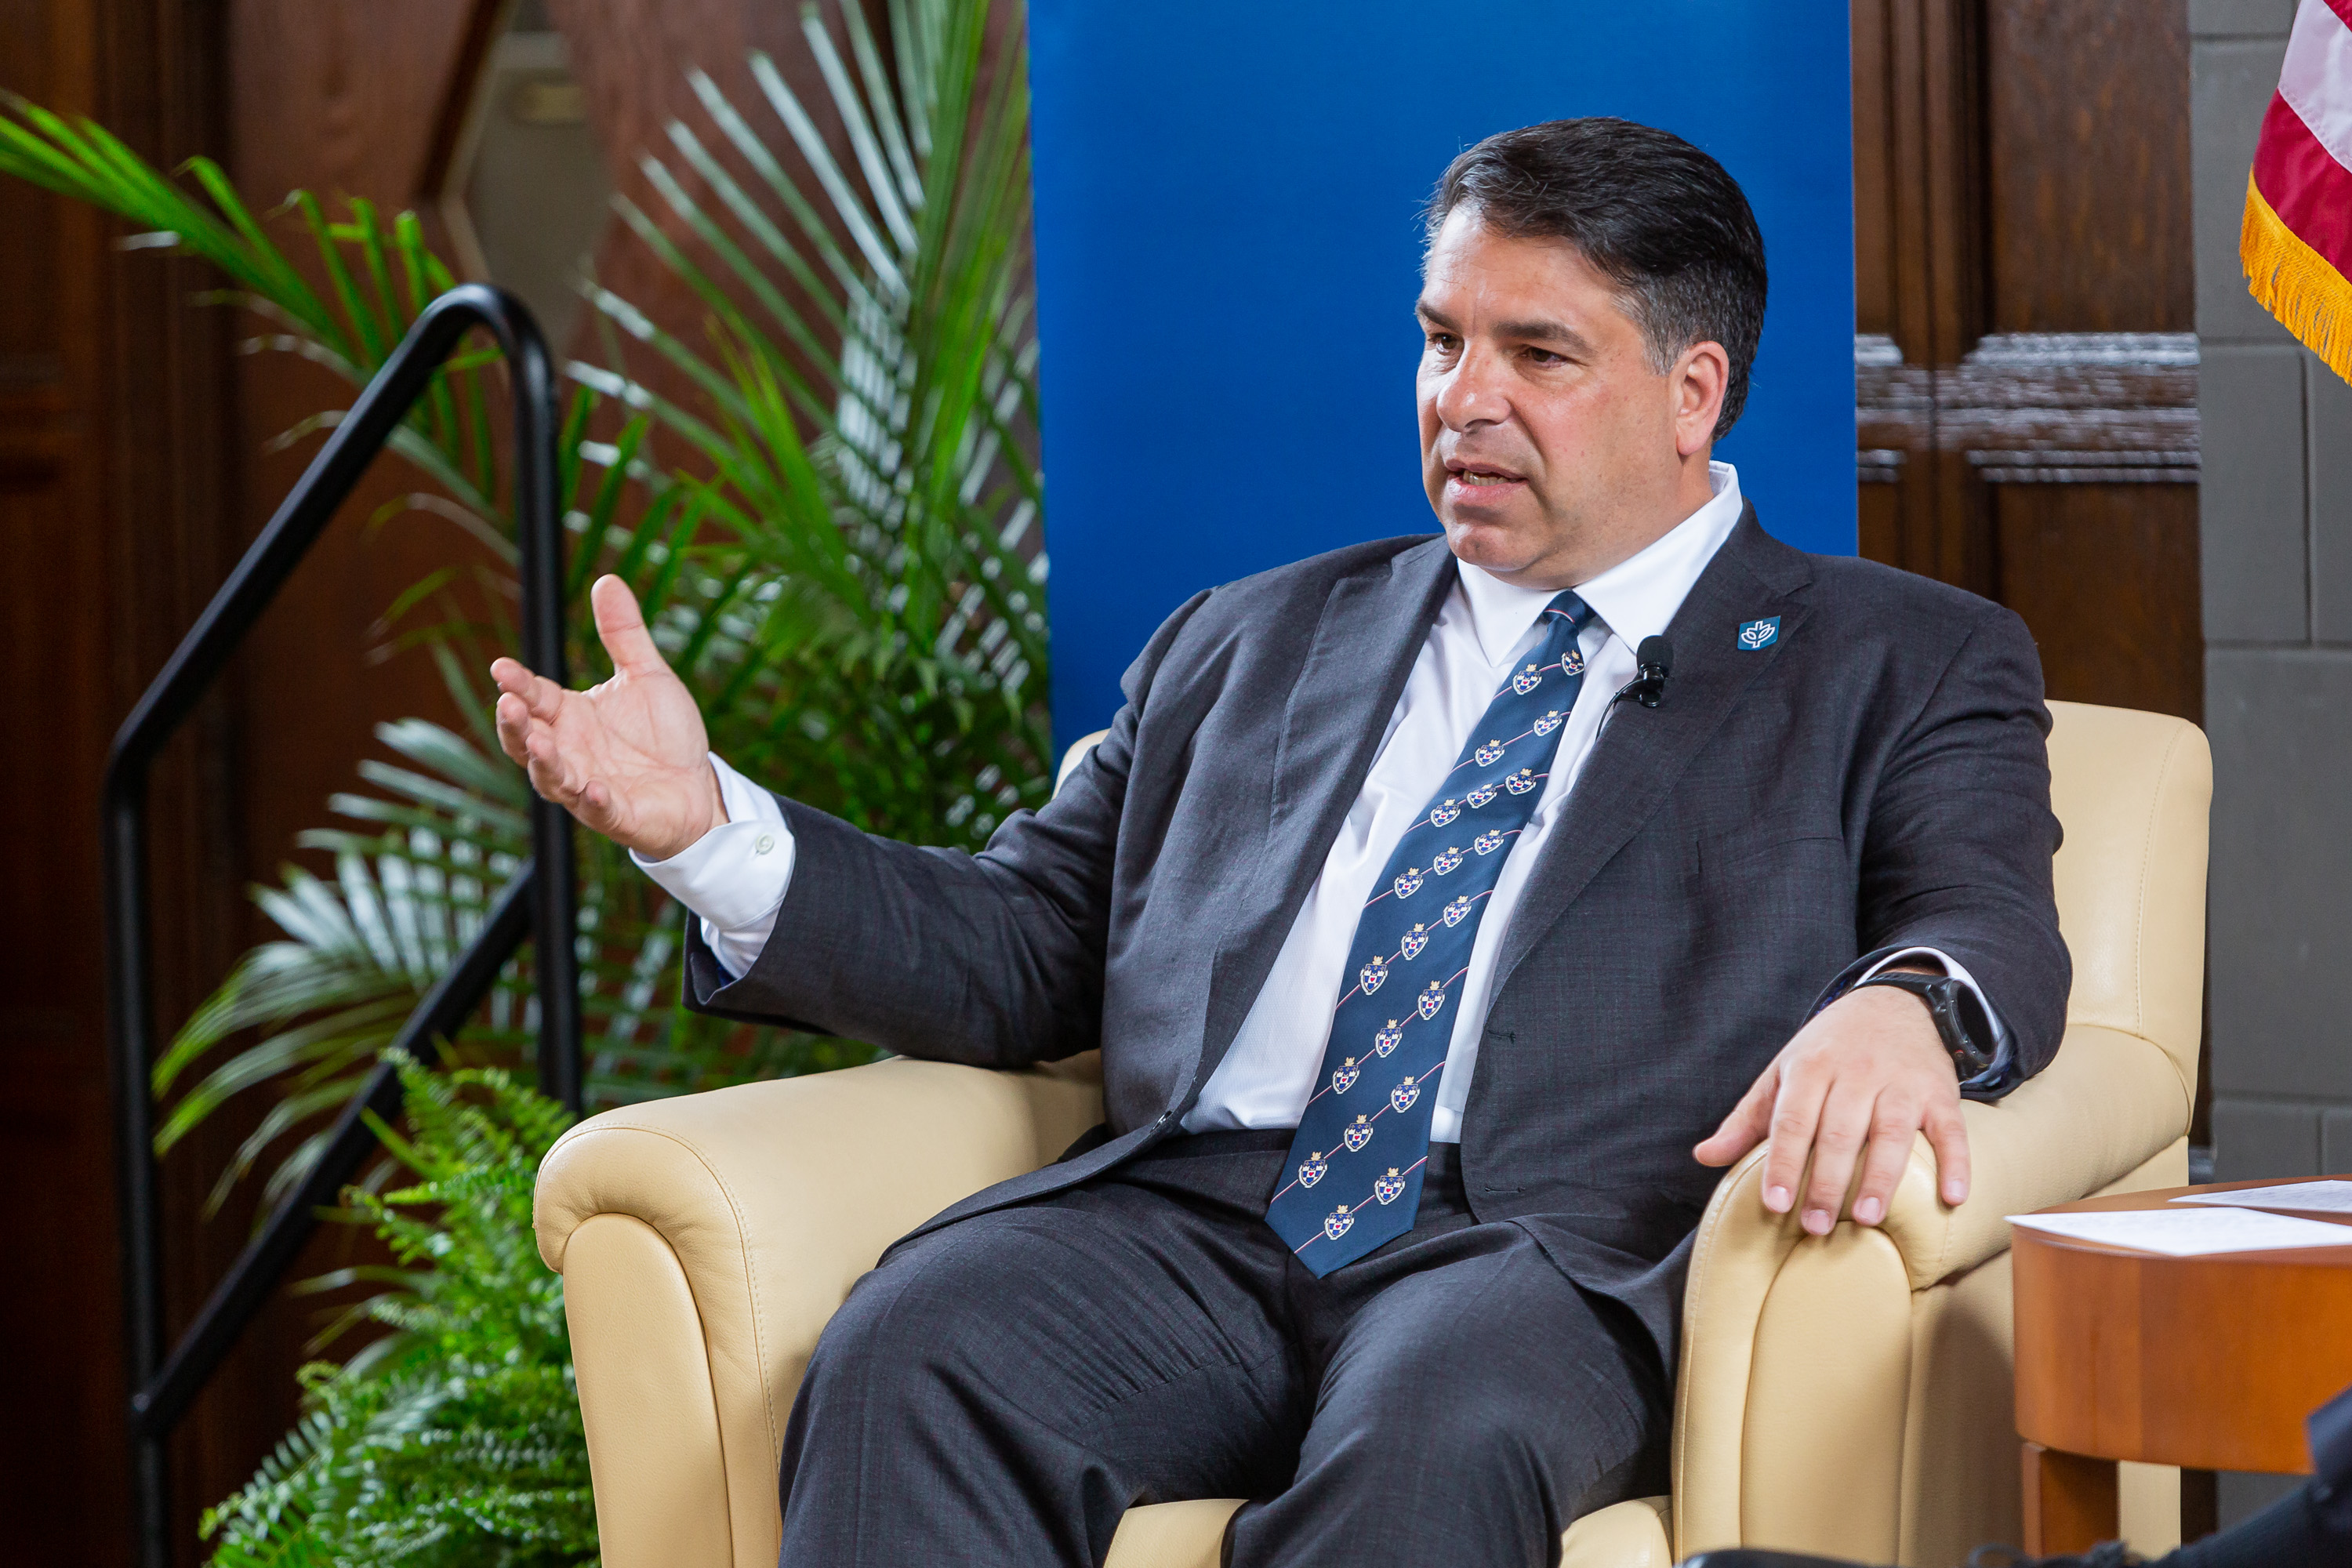 “To me, there was no better opportunity to write the next standards of quality for higher education than at DePaul," Manuel said during the morning's armchair conversation.